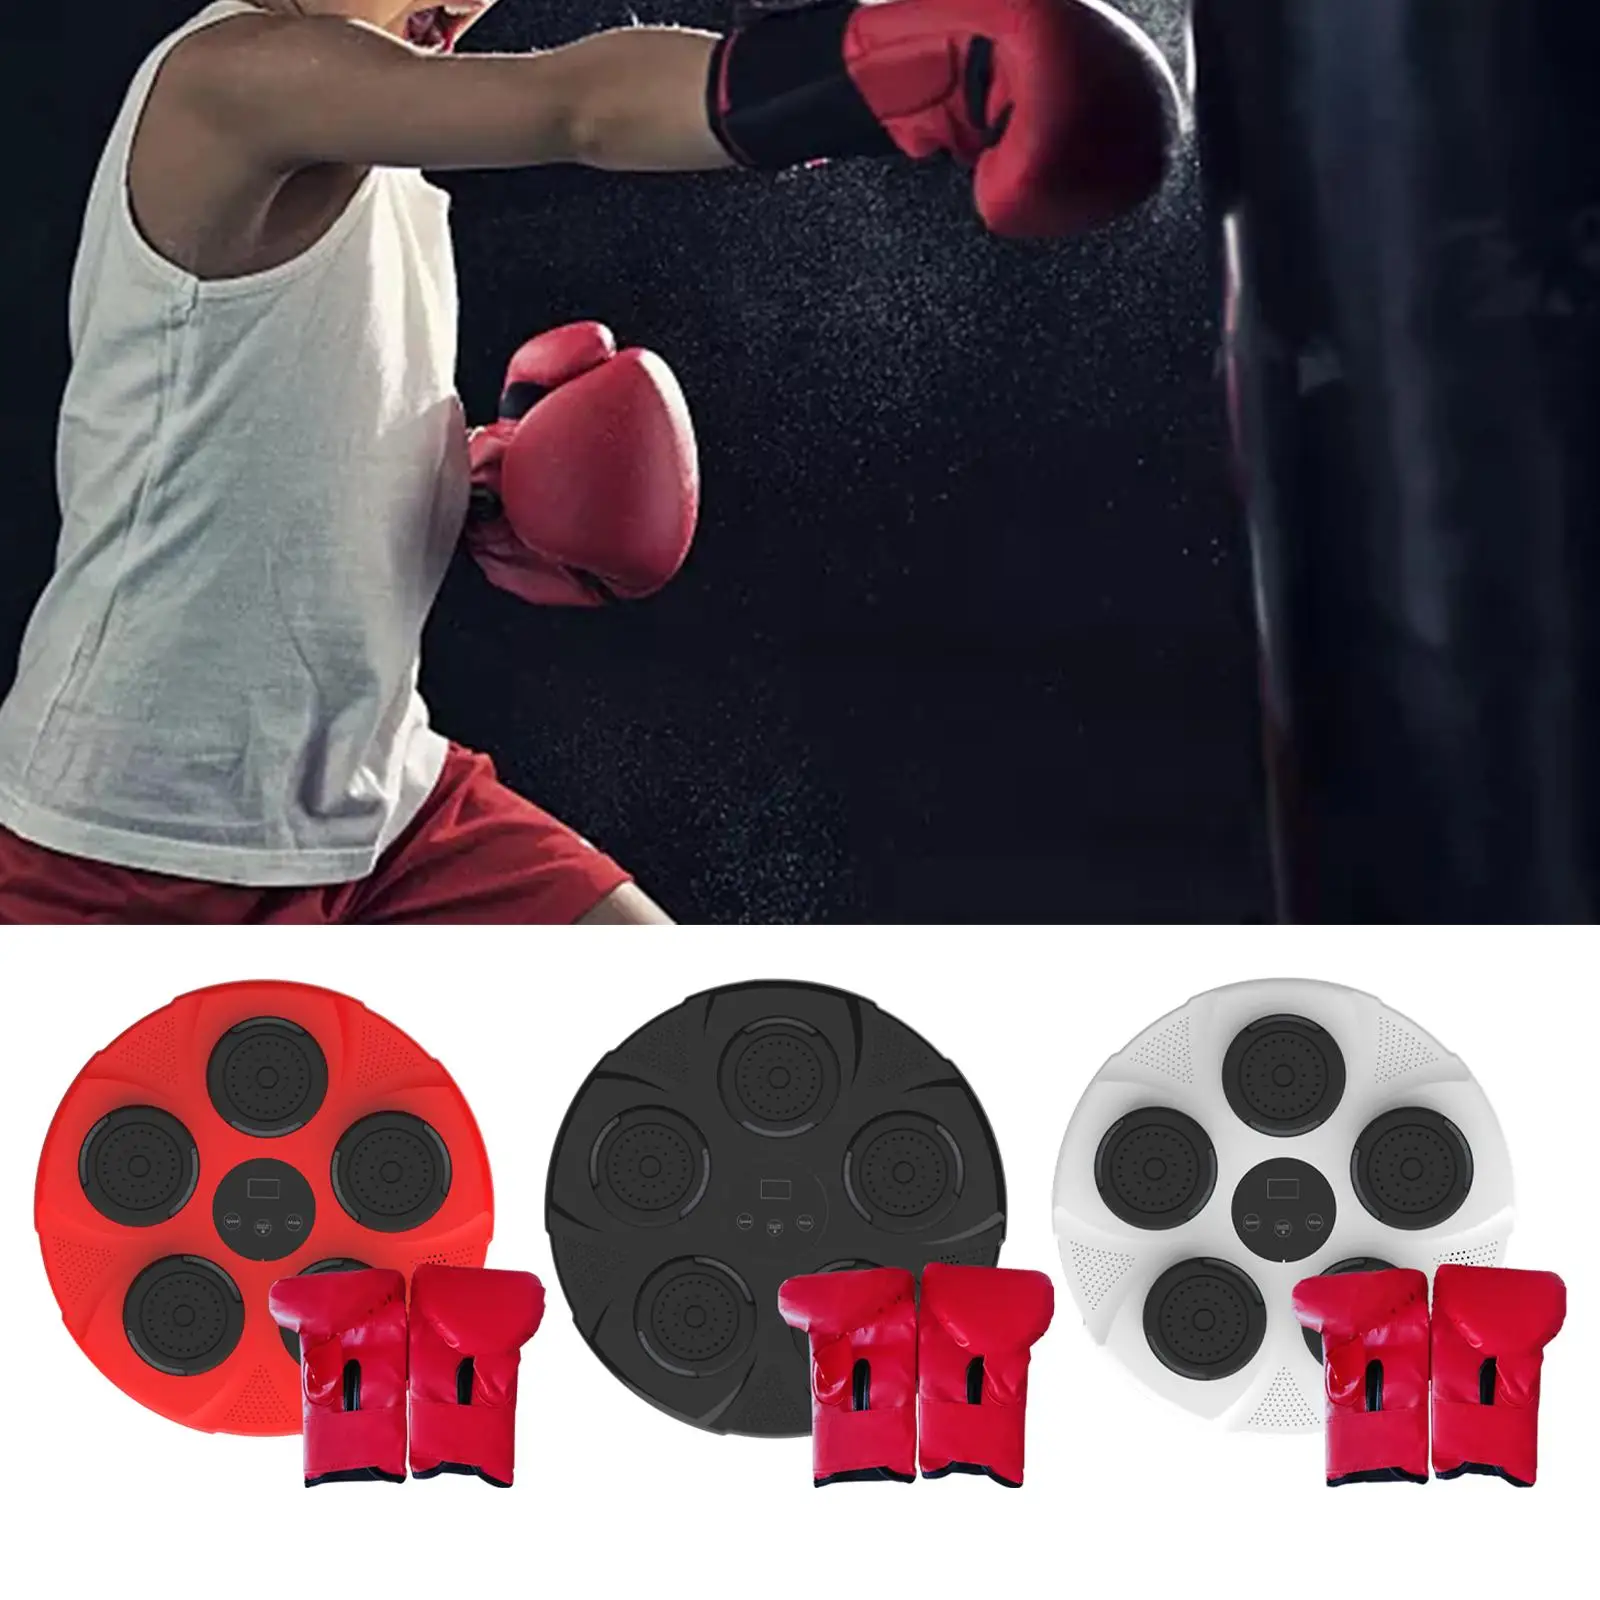 Music Boxing Machine Electronic Music Boxing Wall Target Rhythm Wall Target for Strength Training Kickboxing Practice Home Gym